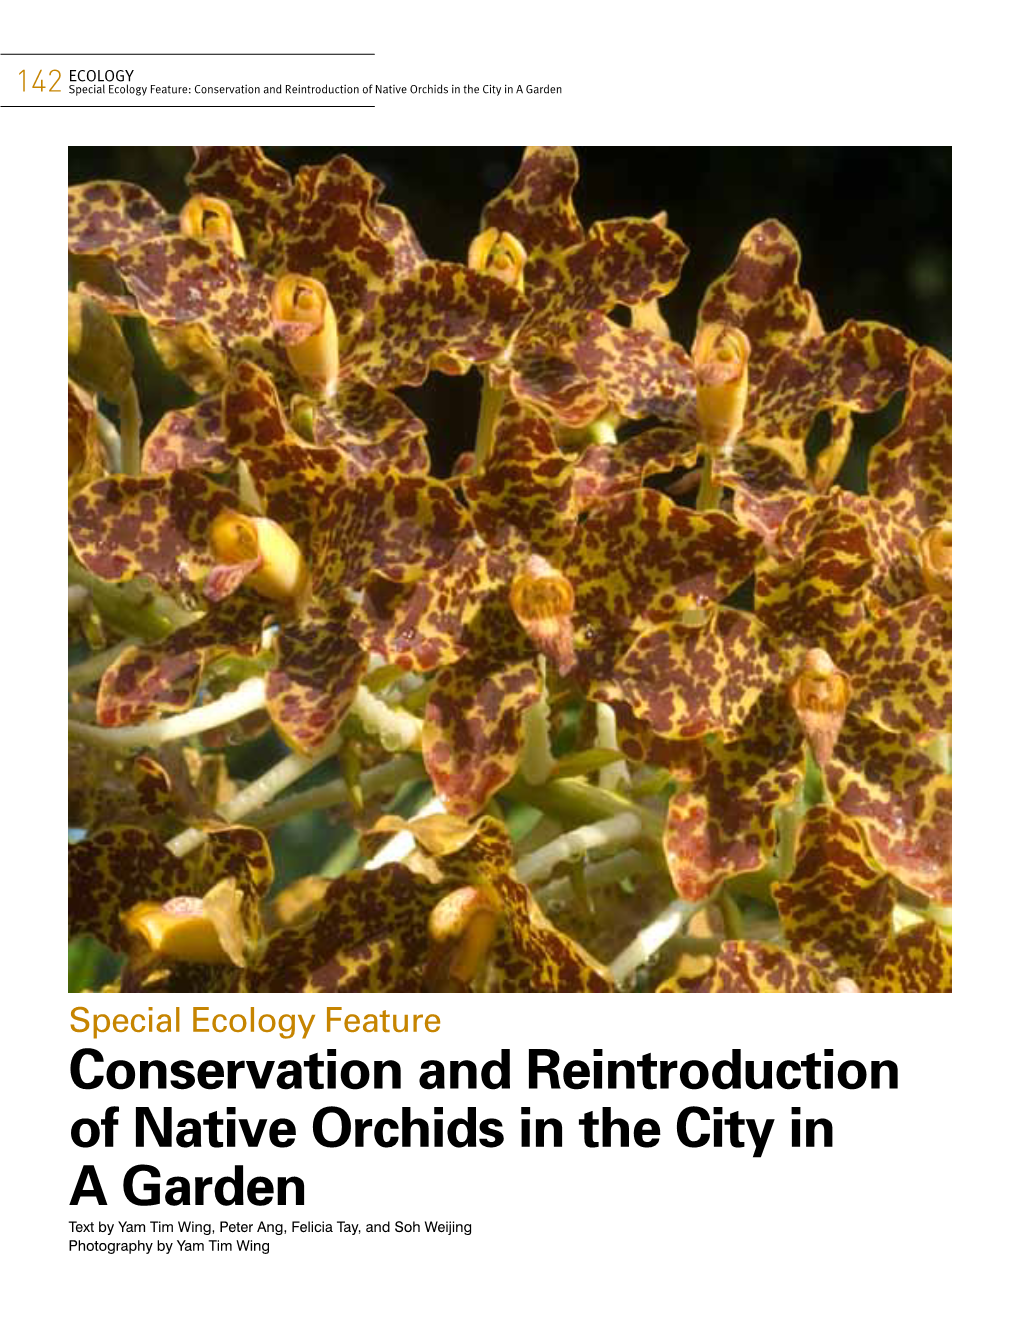 Conservation and Reintroduction of Native Orchids in the City in a Garden